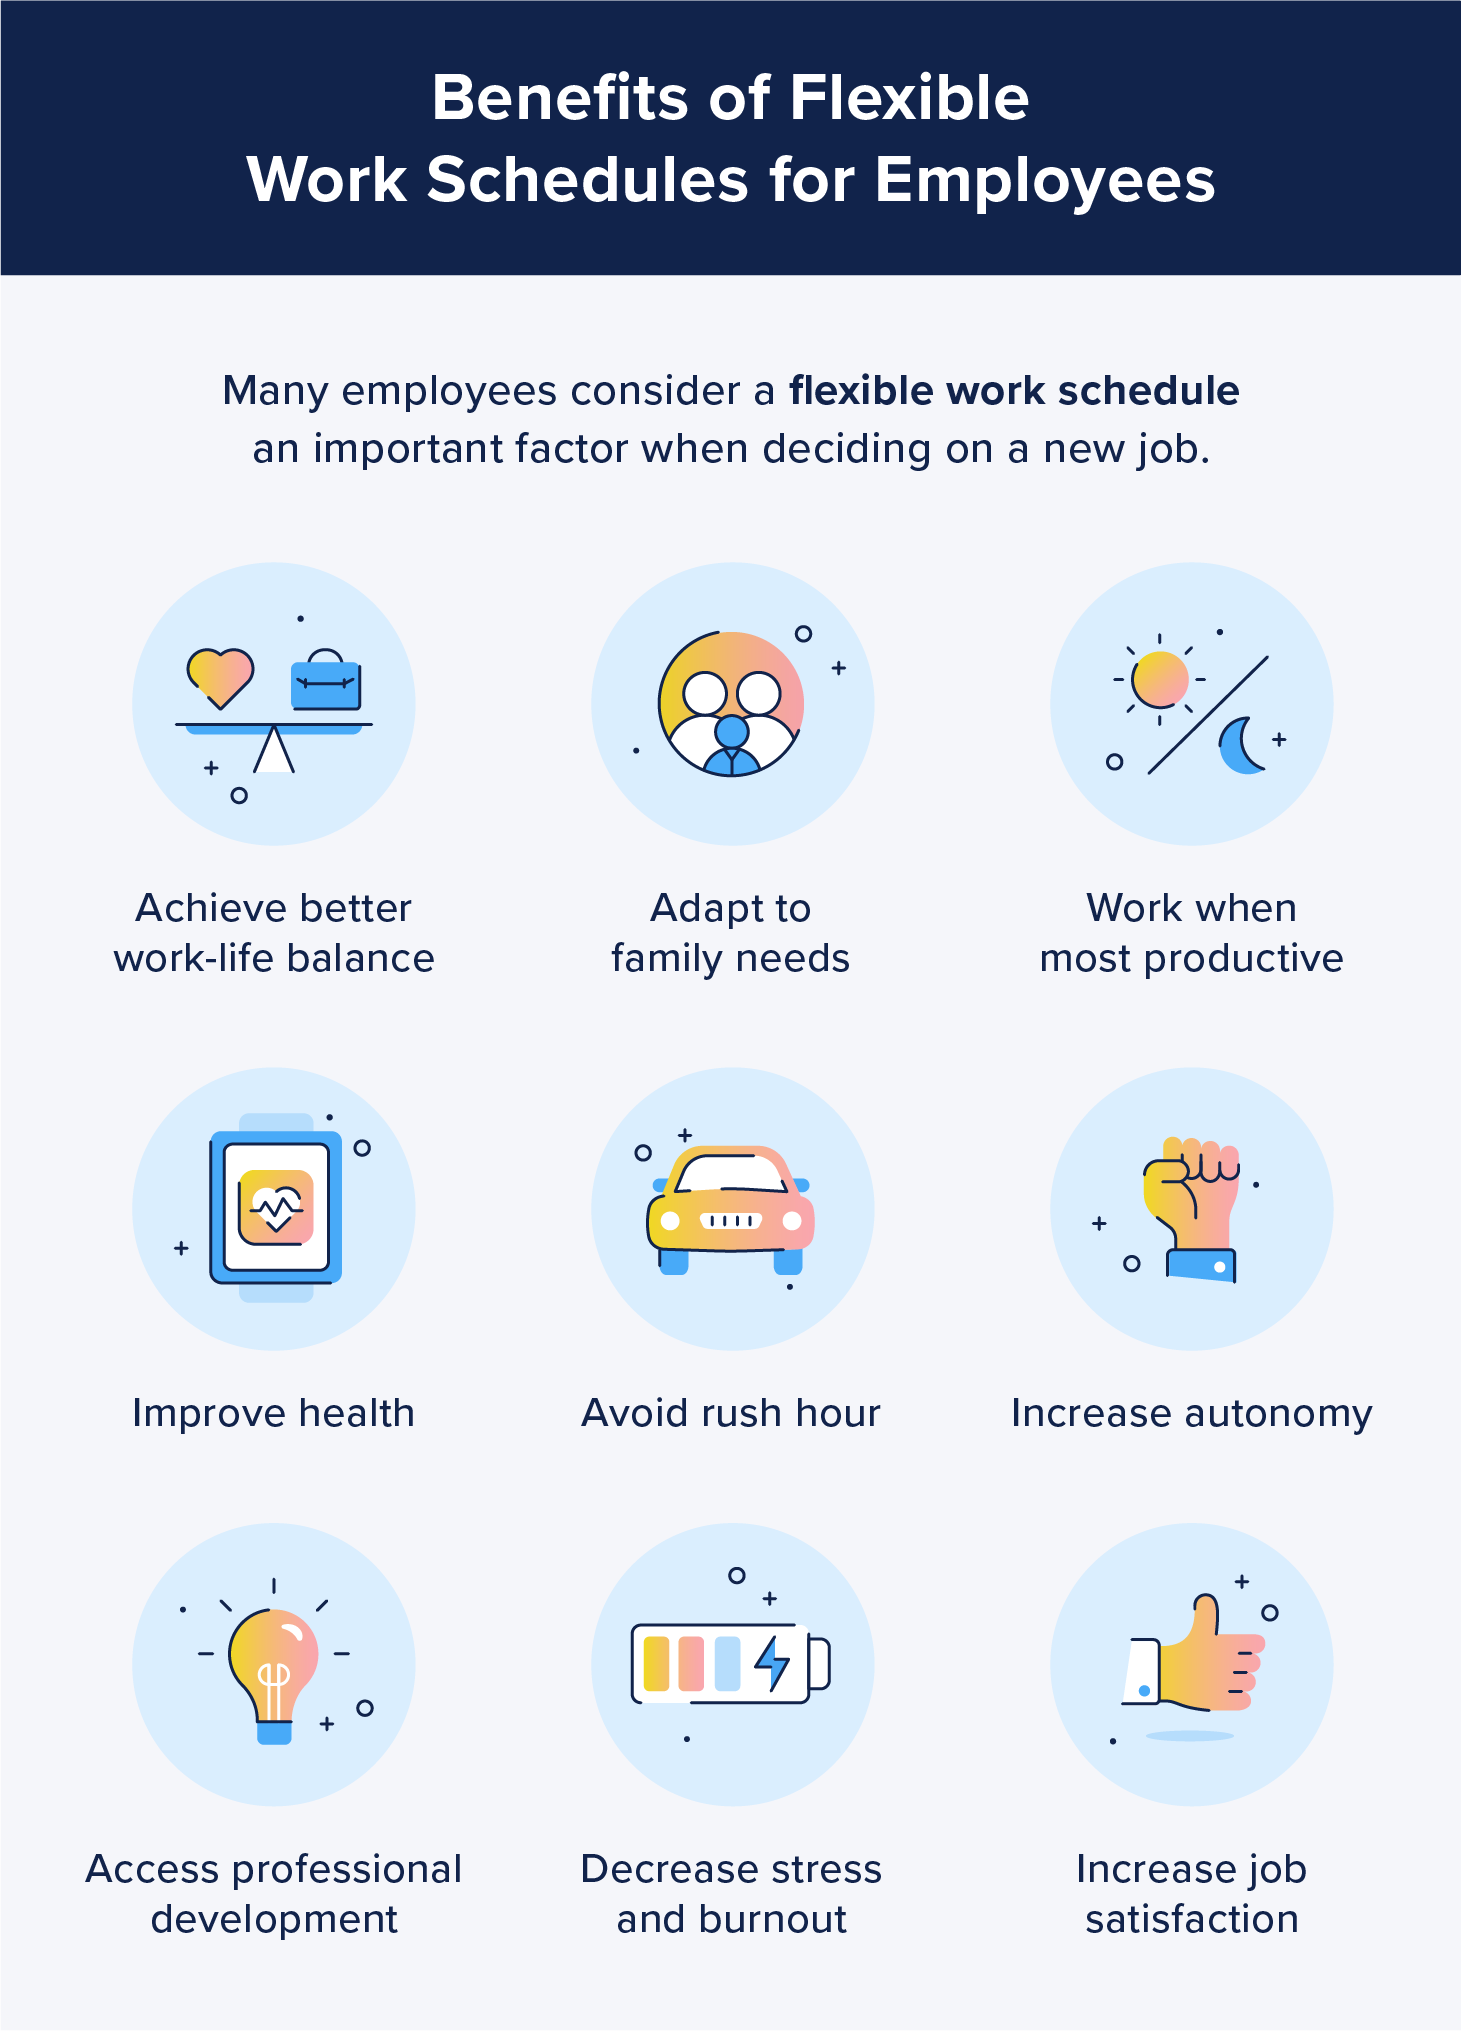 benefits of flexible work schedules for employees.